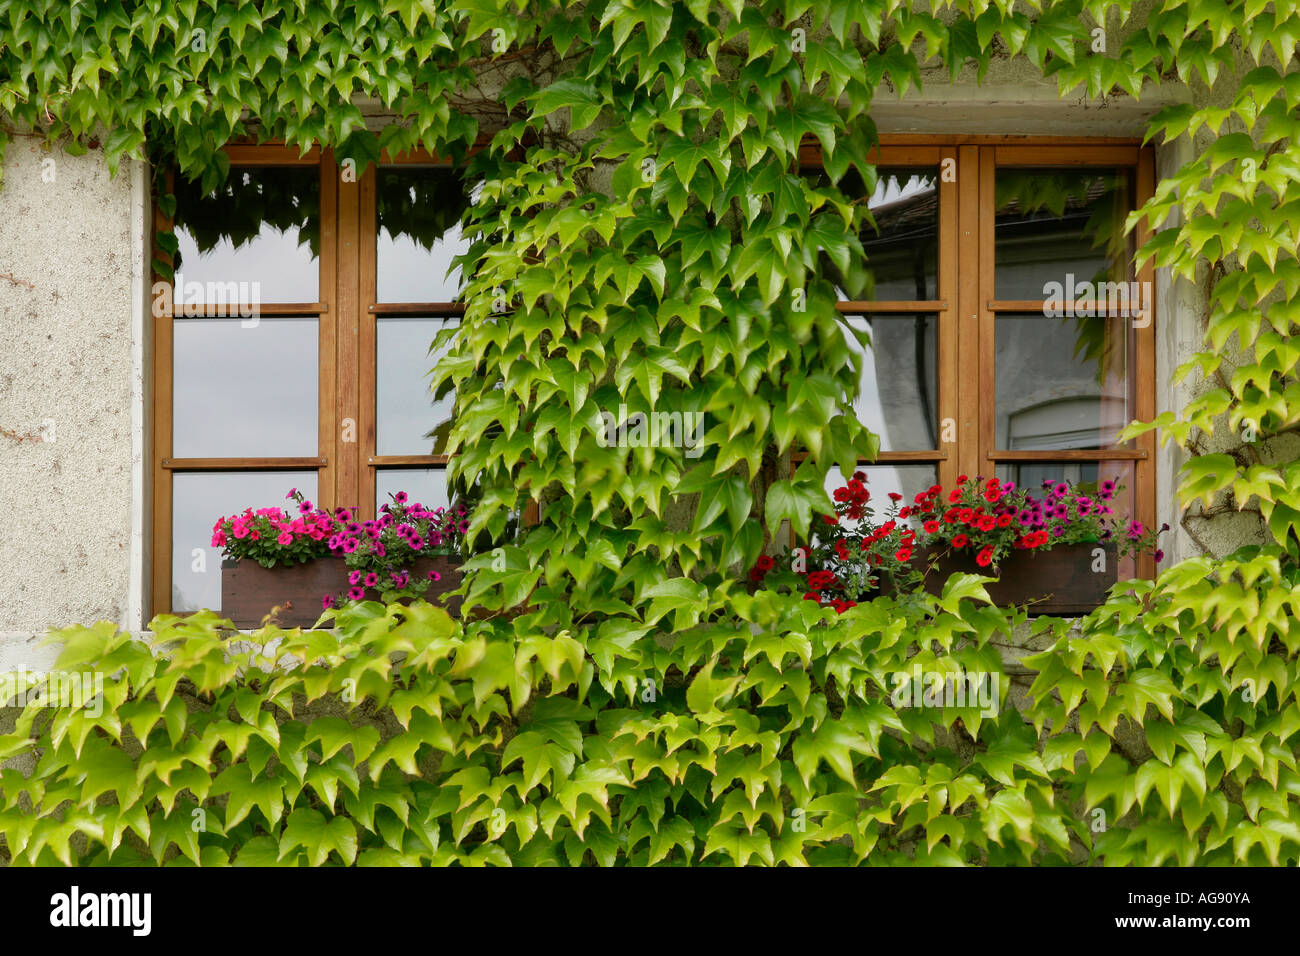 In the old part of Freiburg/Fribourg, Switzerland. Ivy twined around two windows Stock Photo